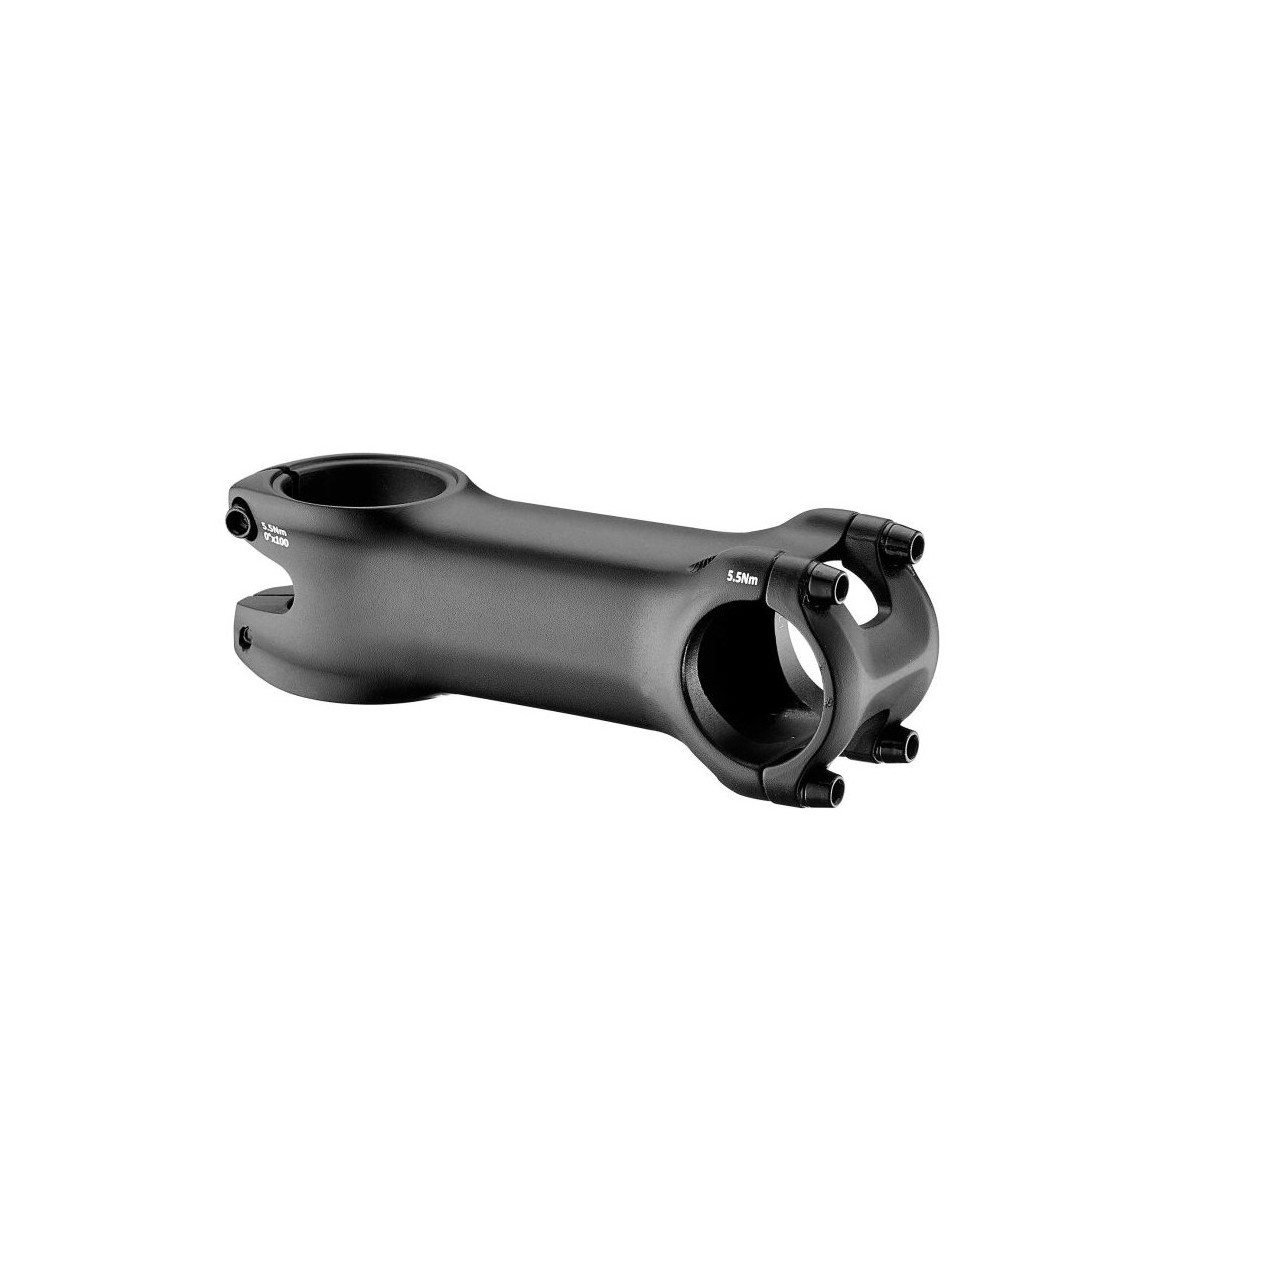 giant contact sl stem 80mm